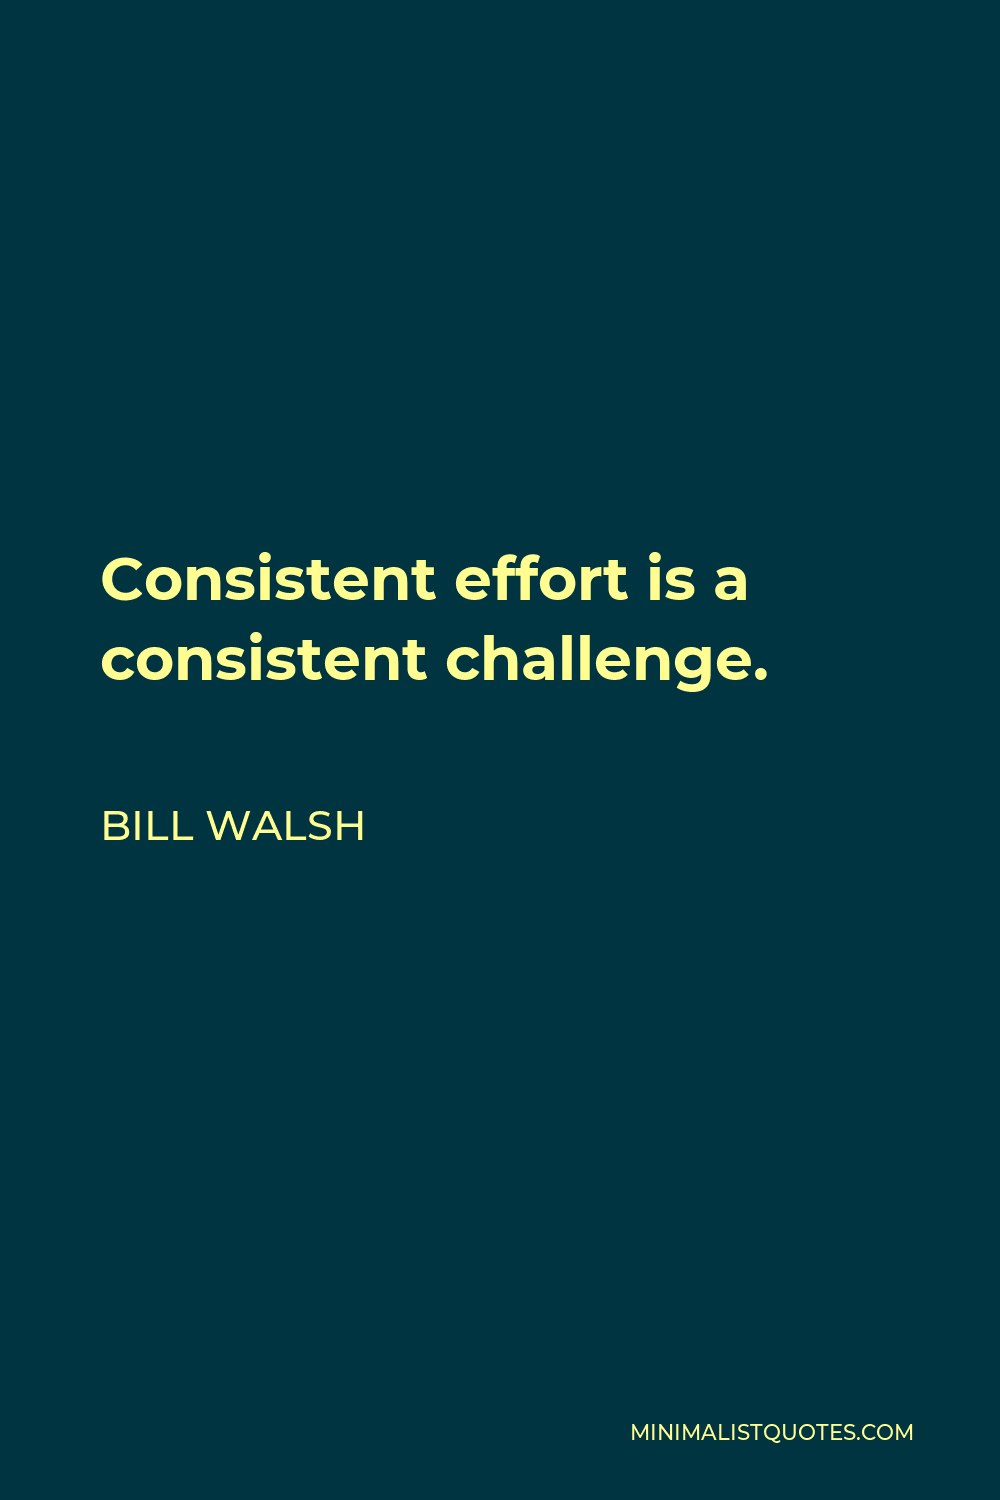 Bill Walsh Quote - Consistent effort is a consistent challenge.